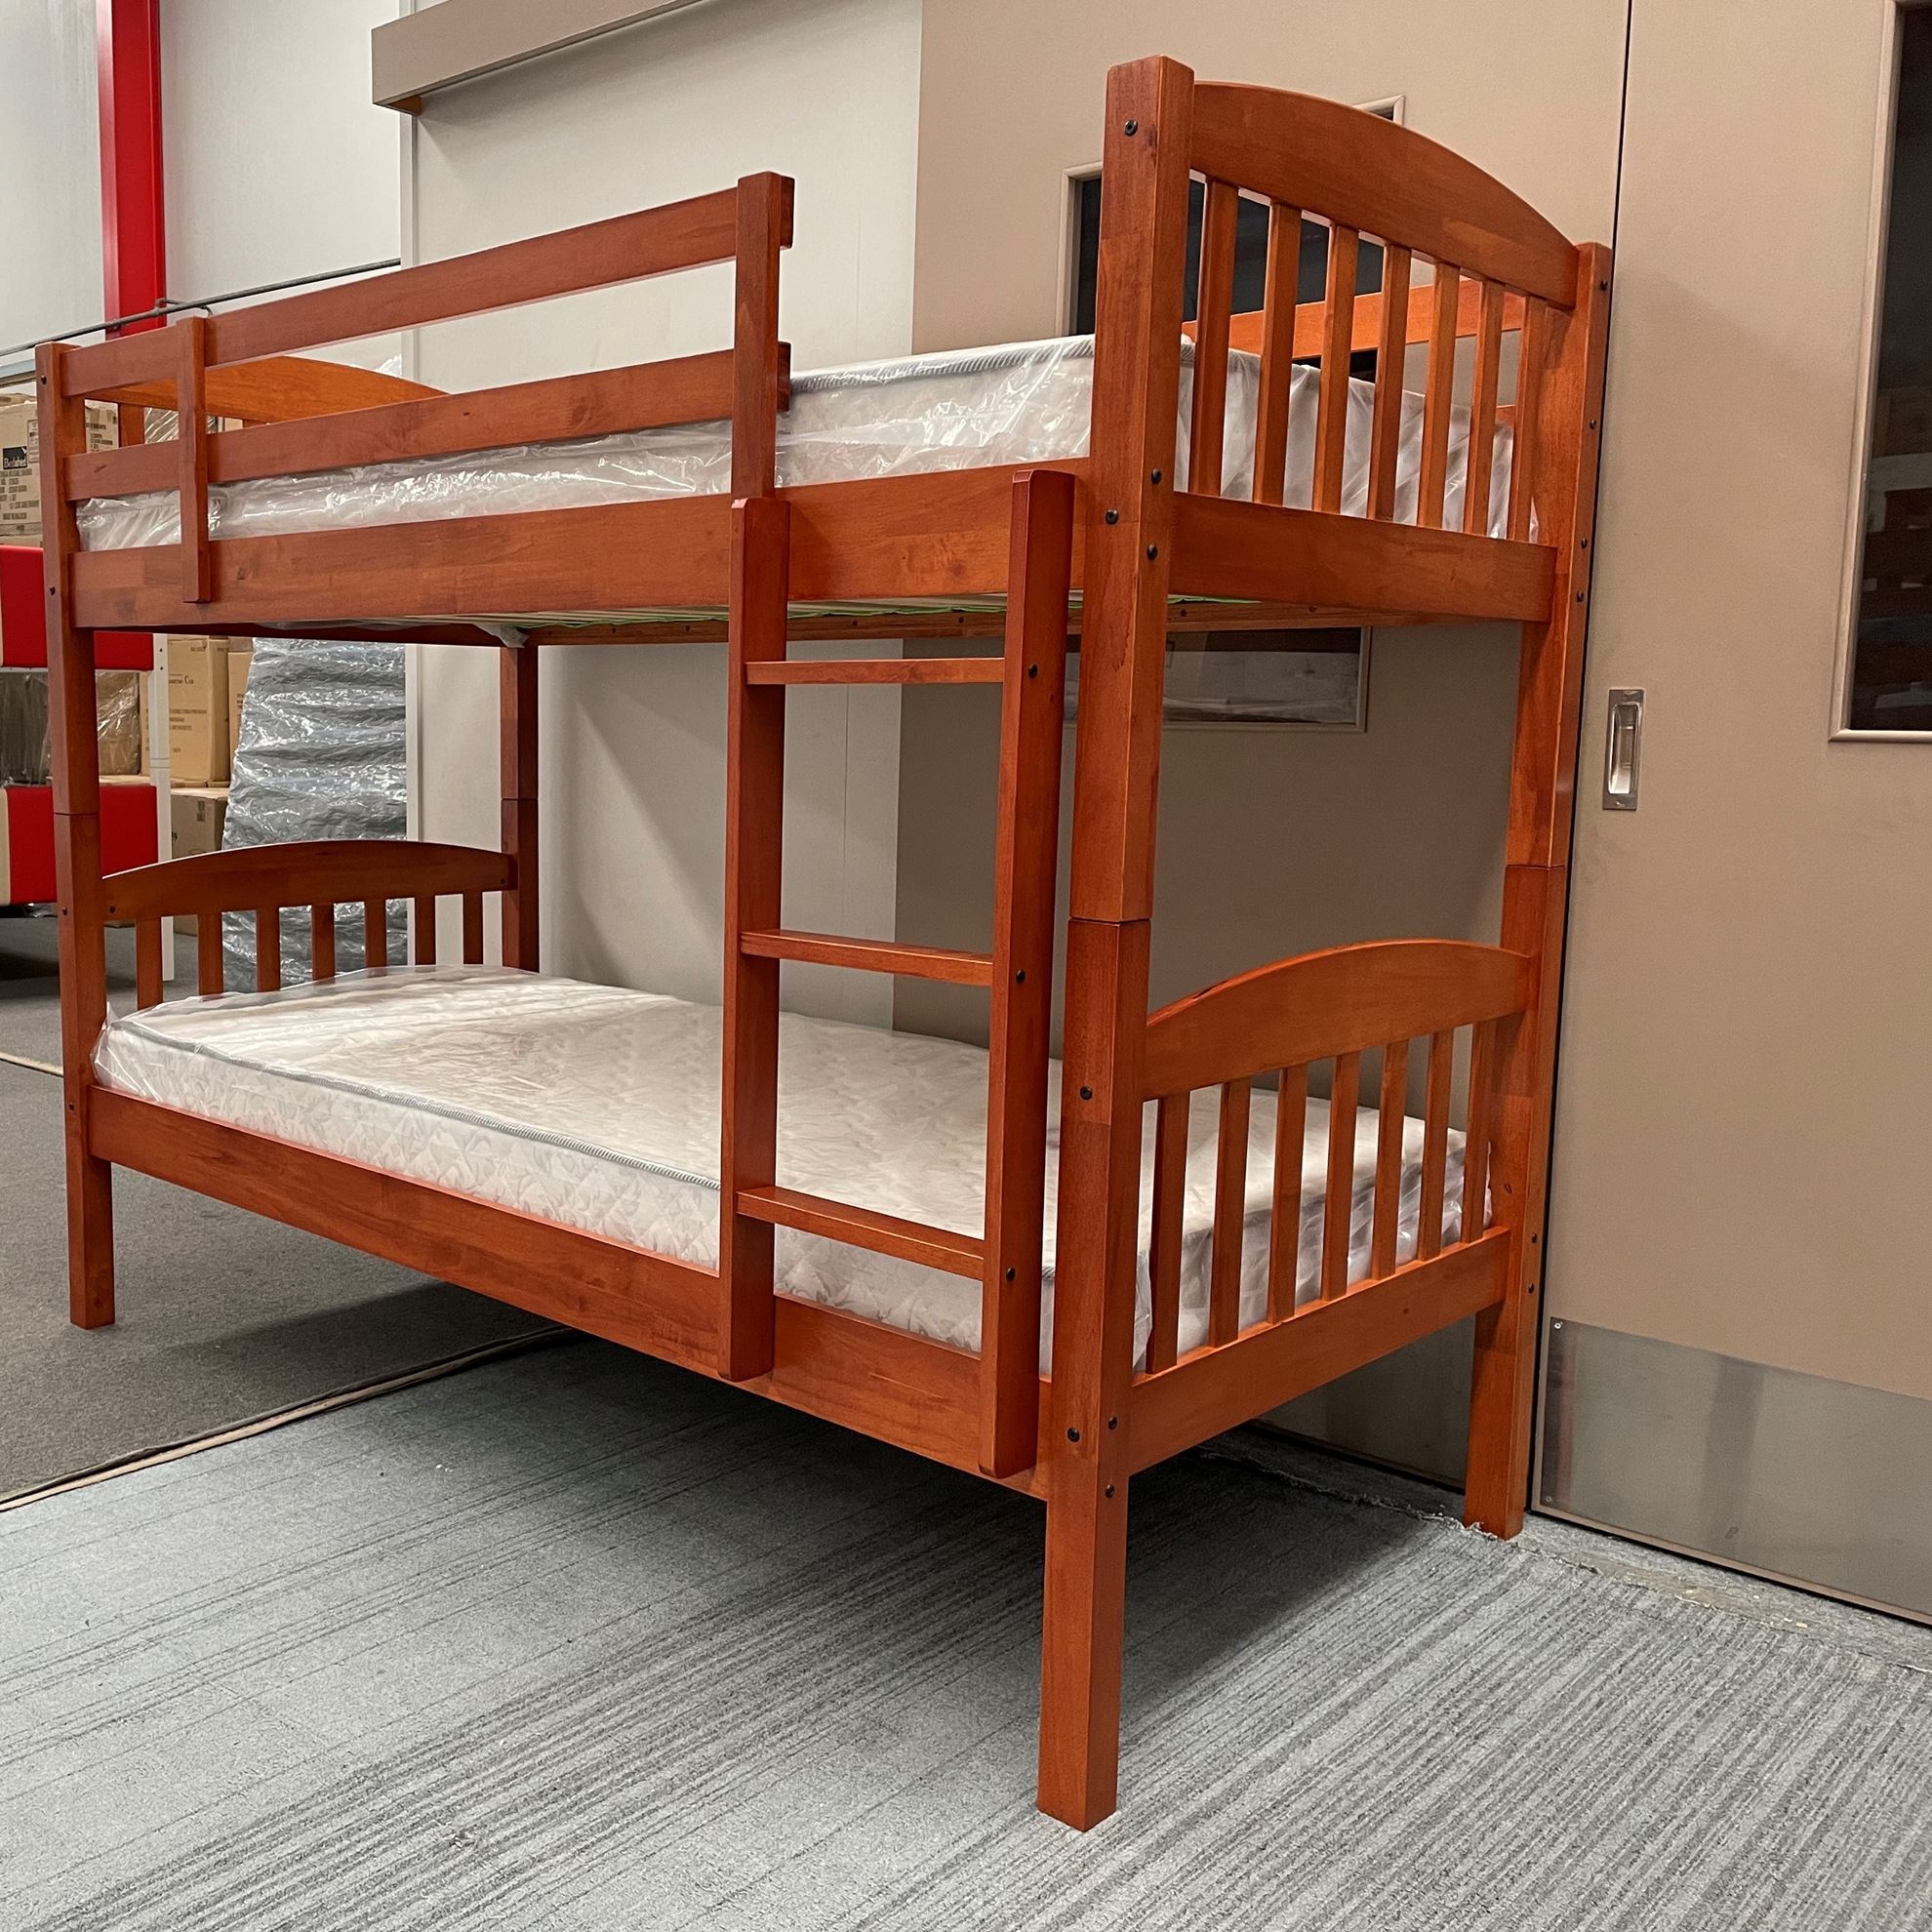 Furniture Place Nz: Miki Bunk Bed With Mattresses Single Solid Hard Wood  Antique Oak Colour